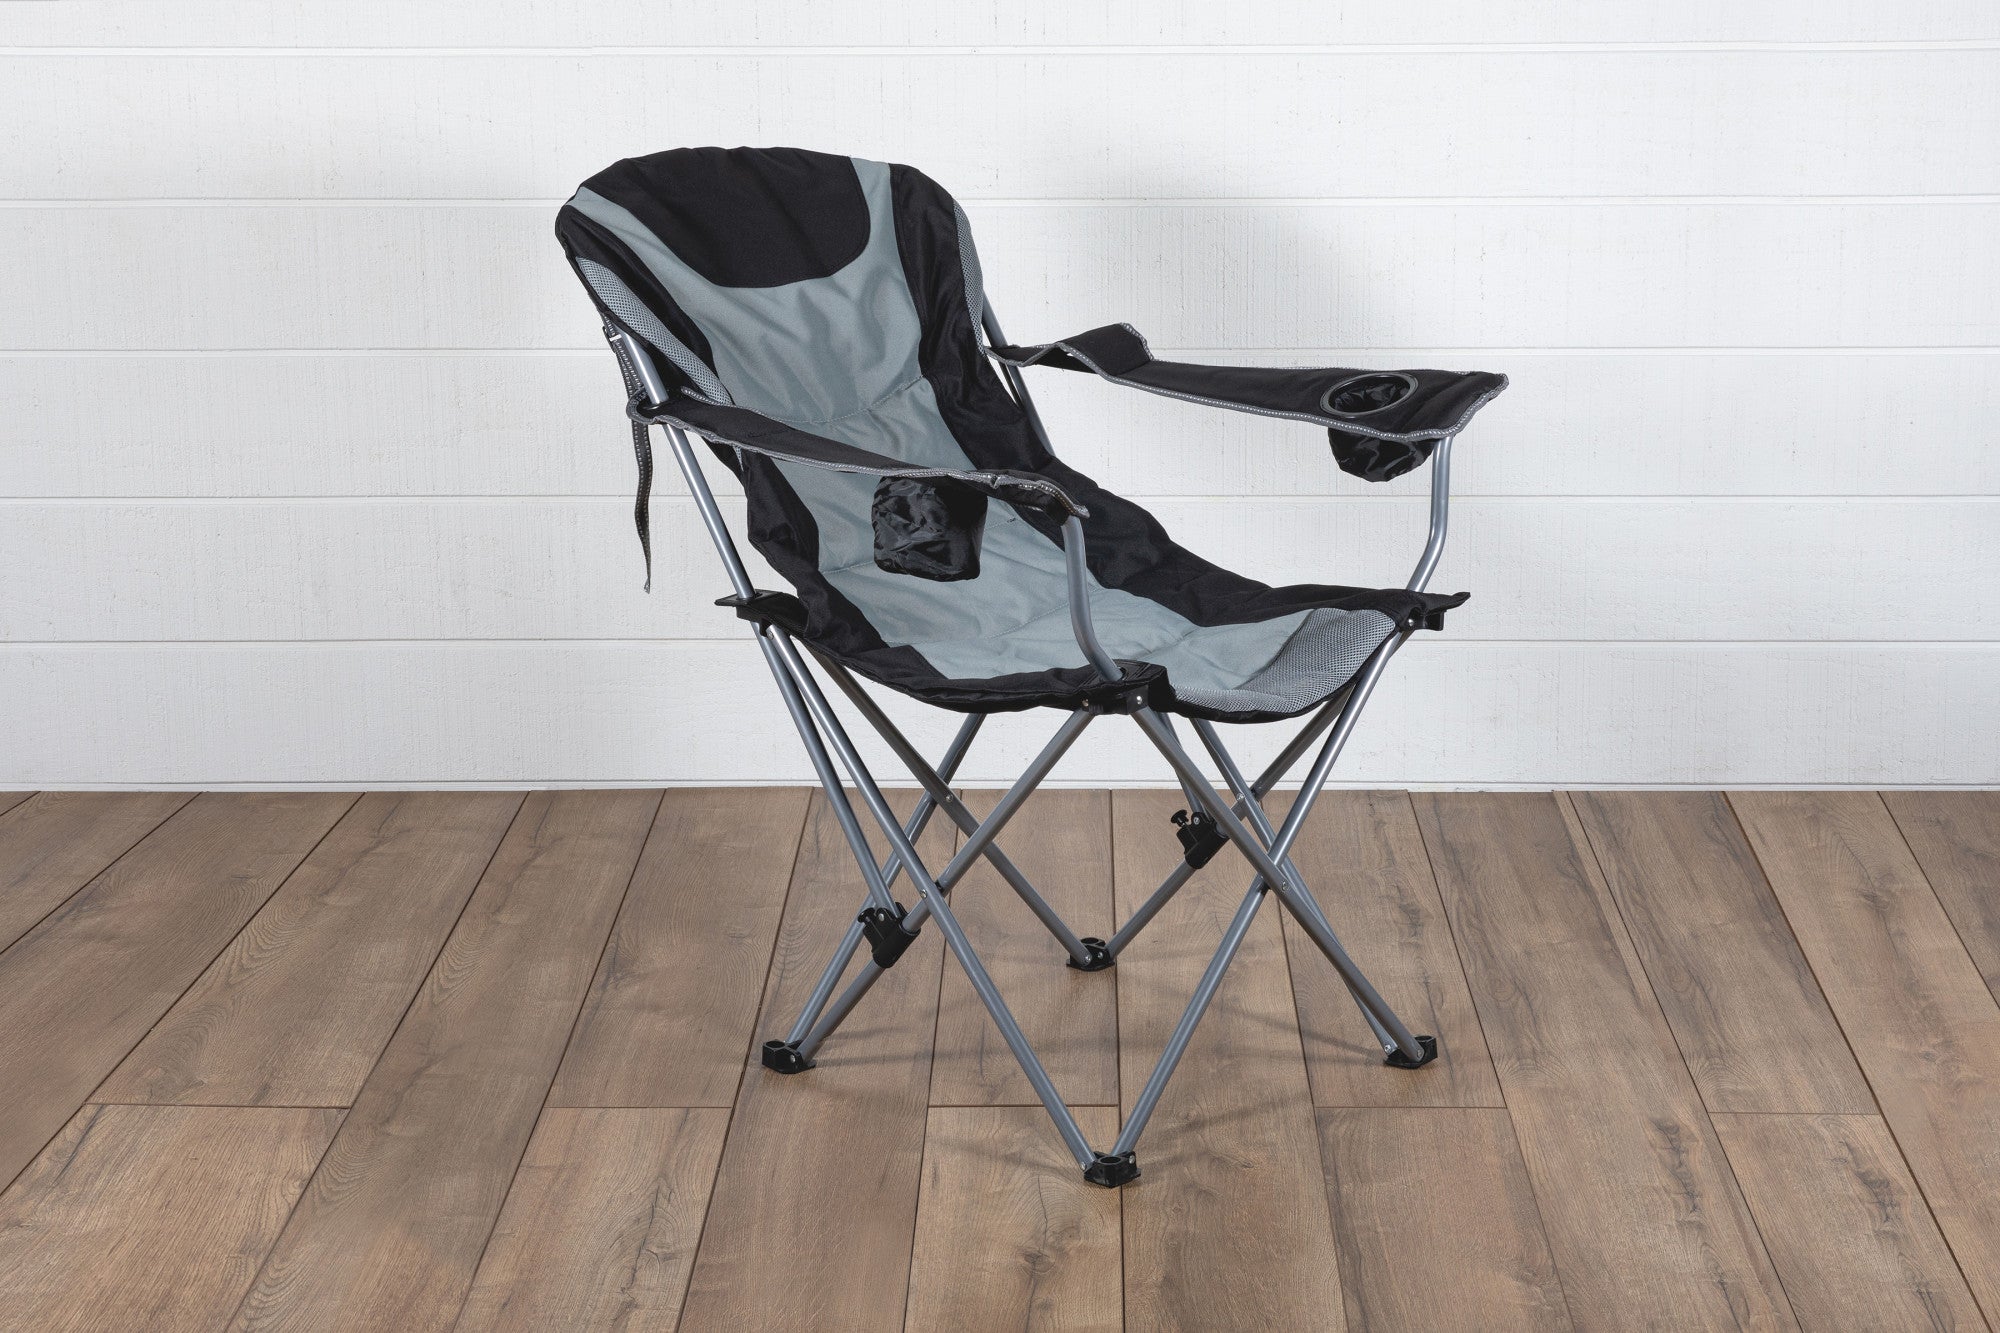 Indiana Hoosiers - Reclining Camp Chair